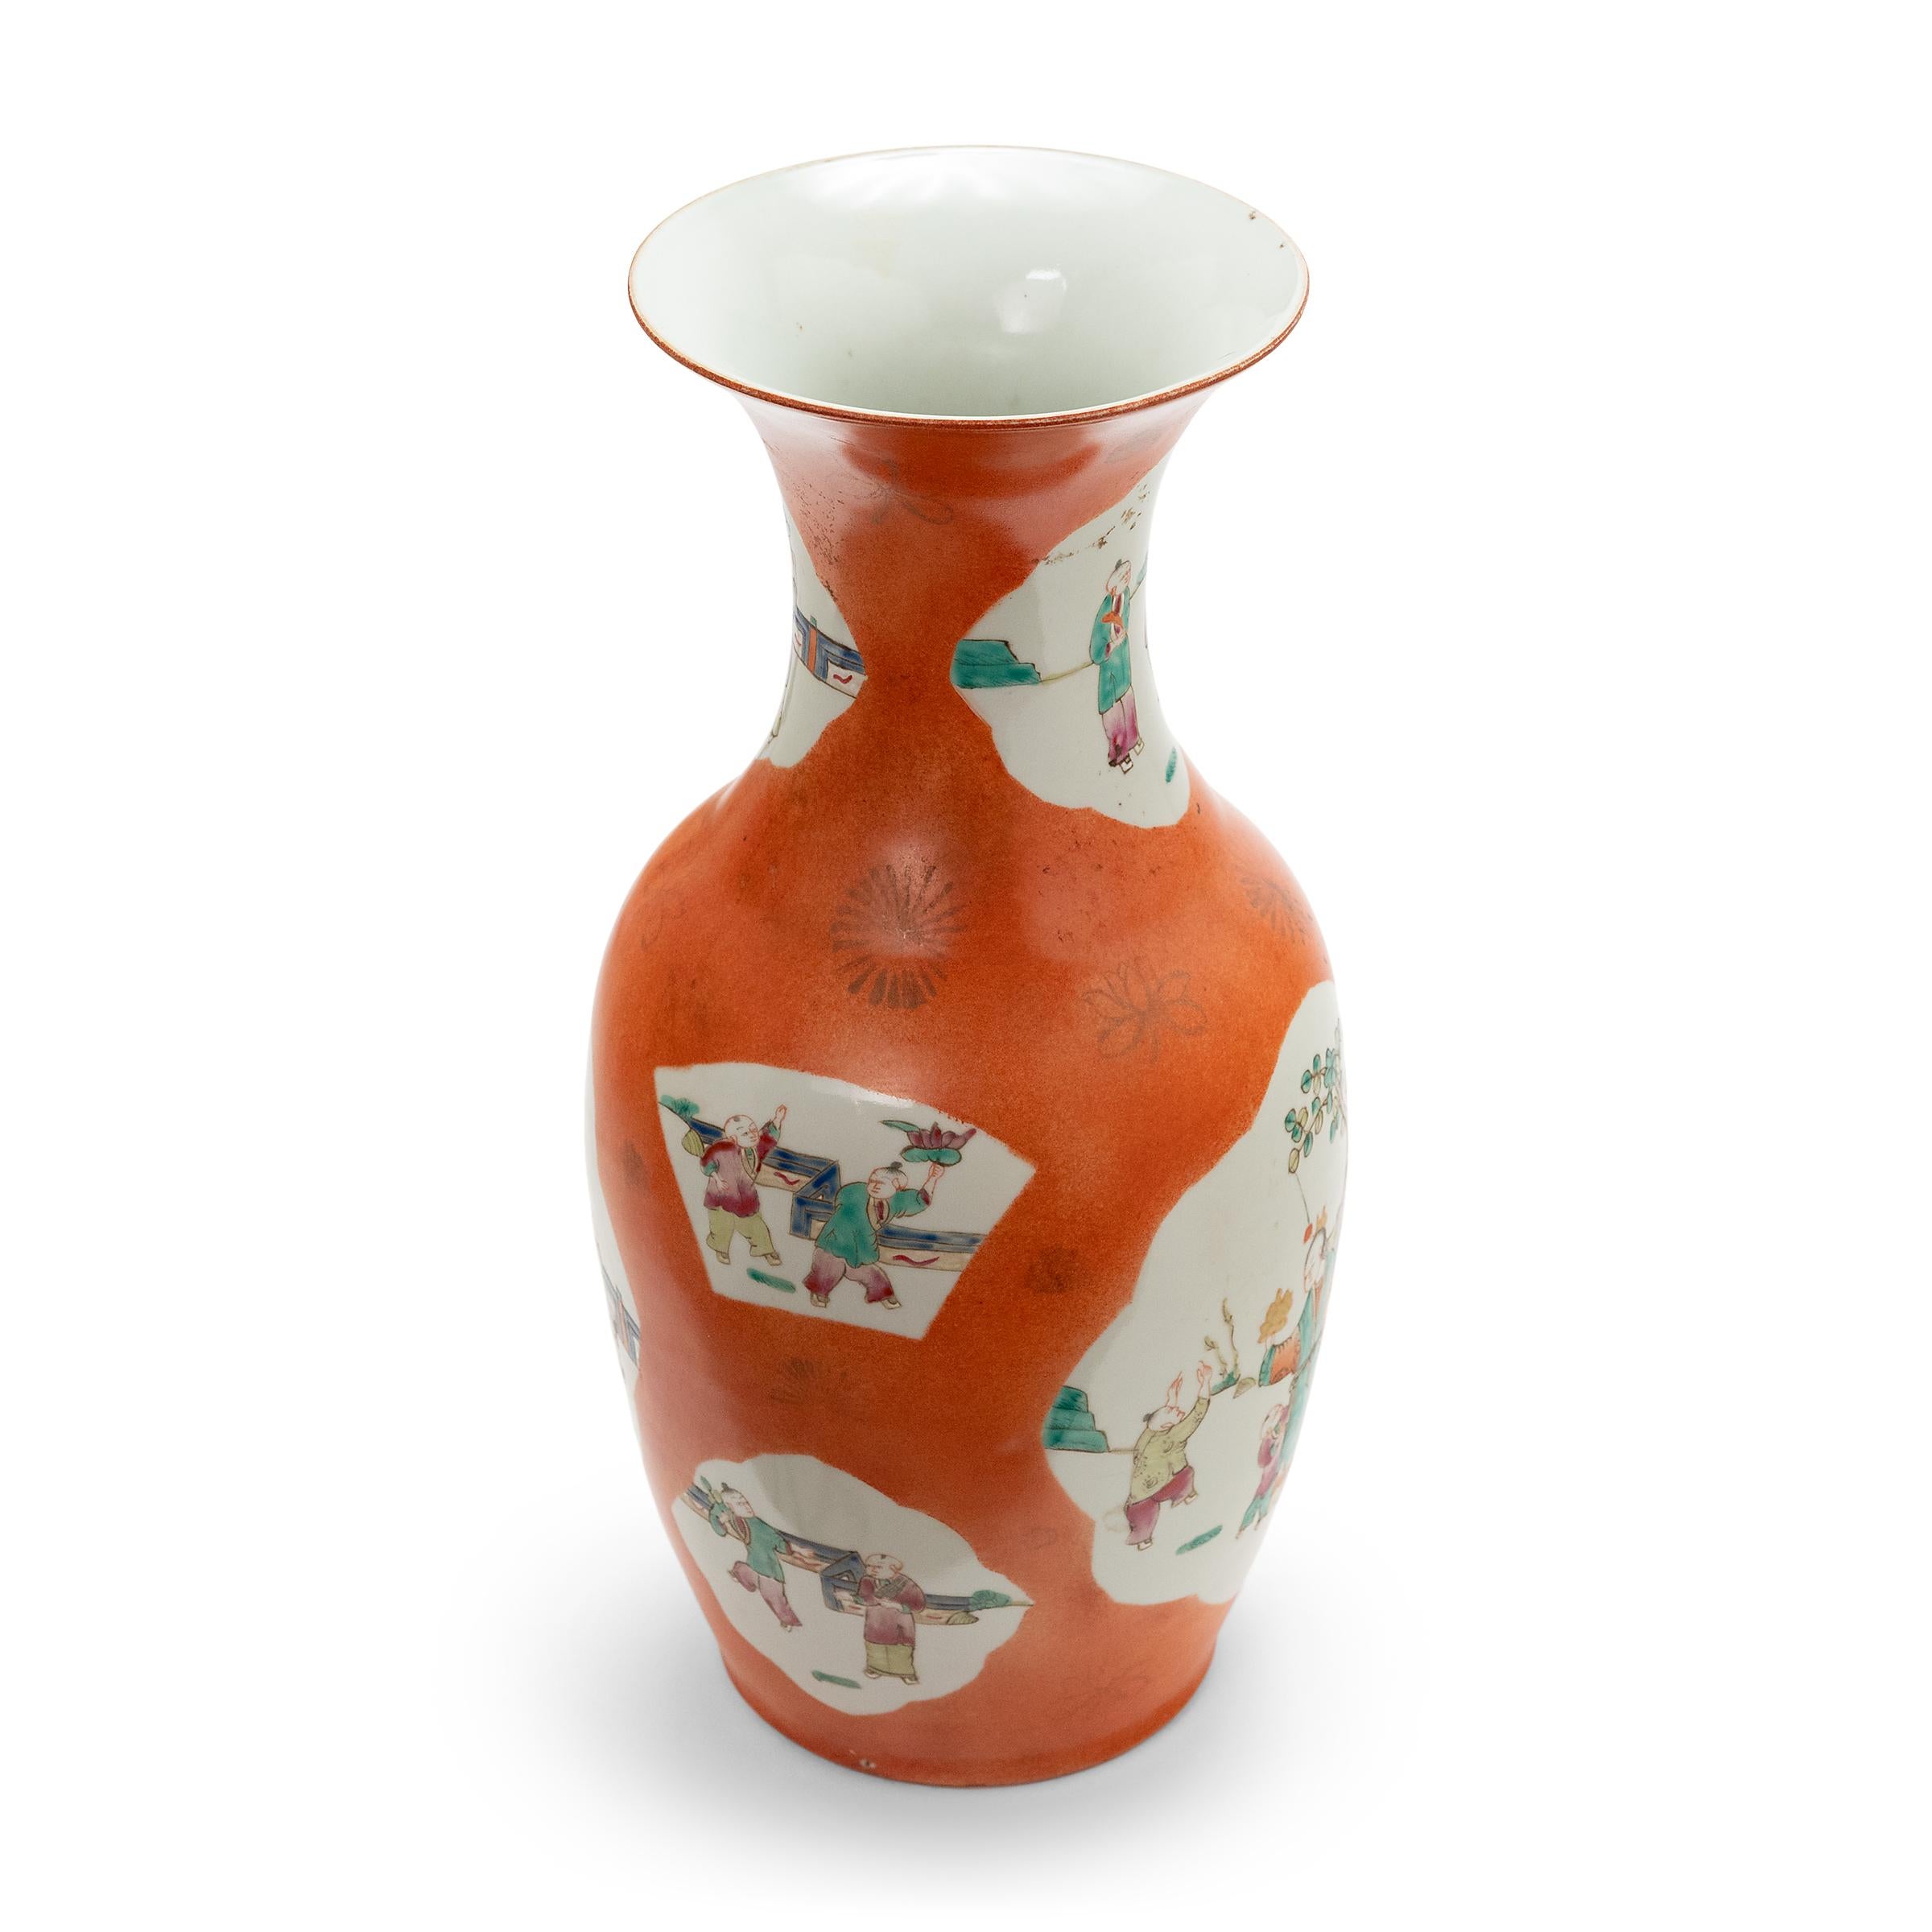 Glazed Persimmon Chinese Phoenix Tail Vase with Children at Play, c. 1920